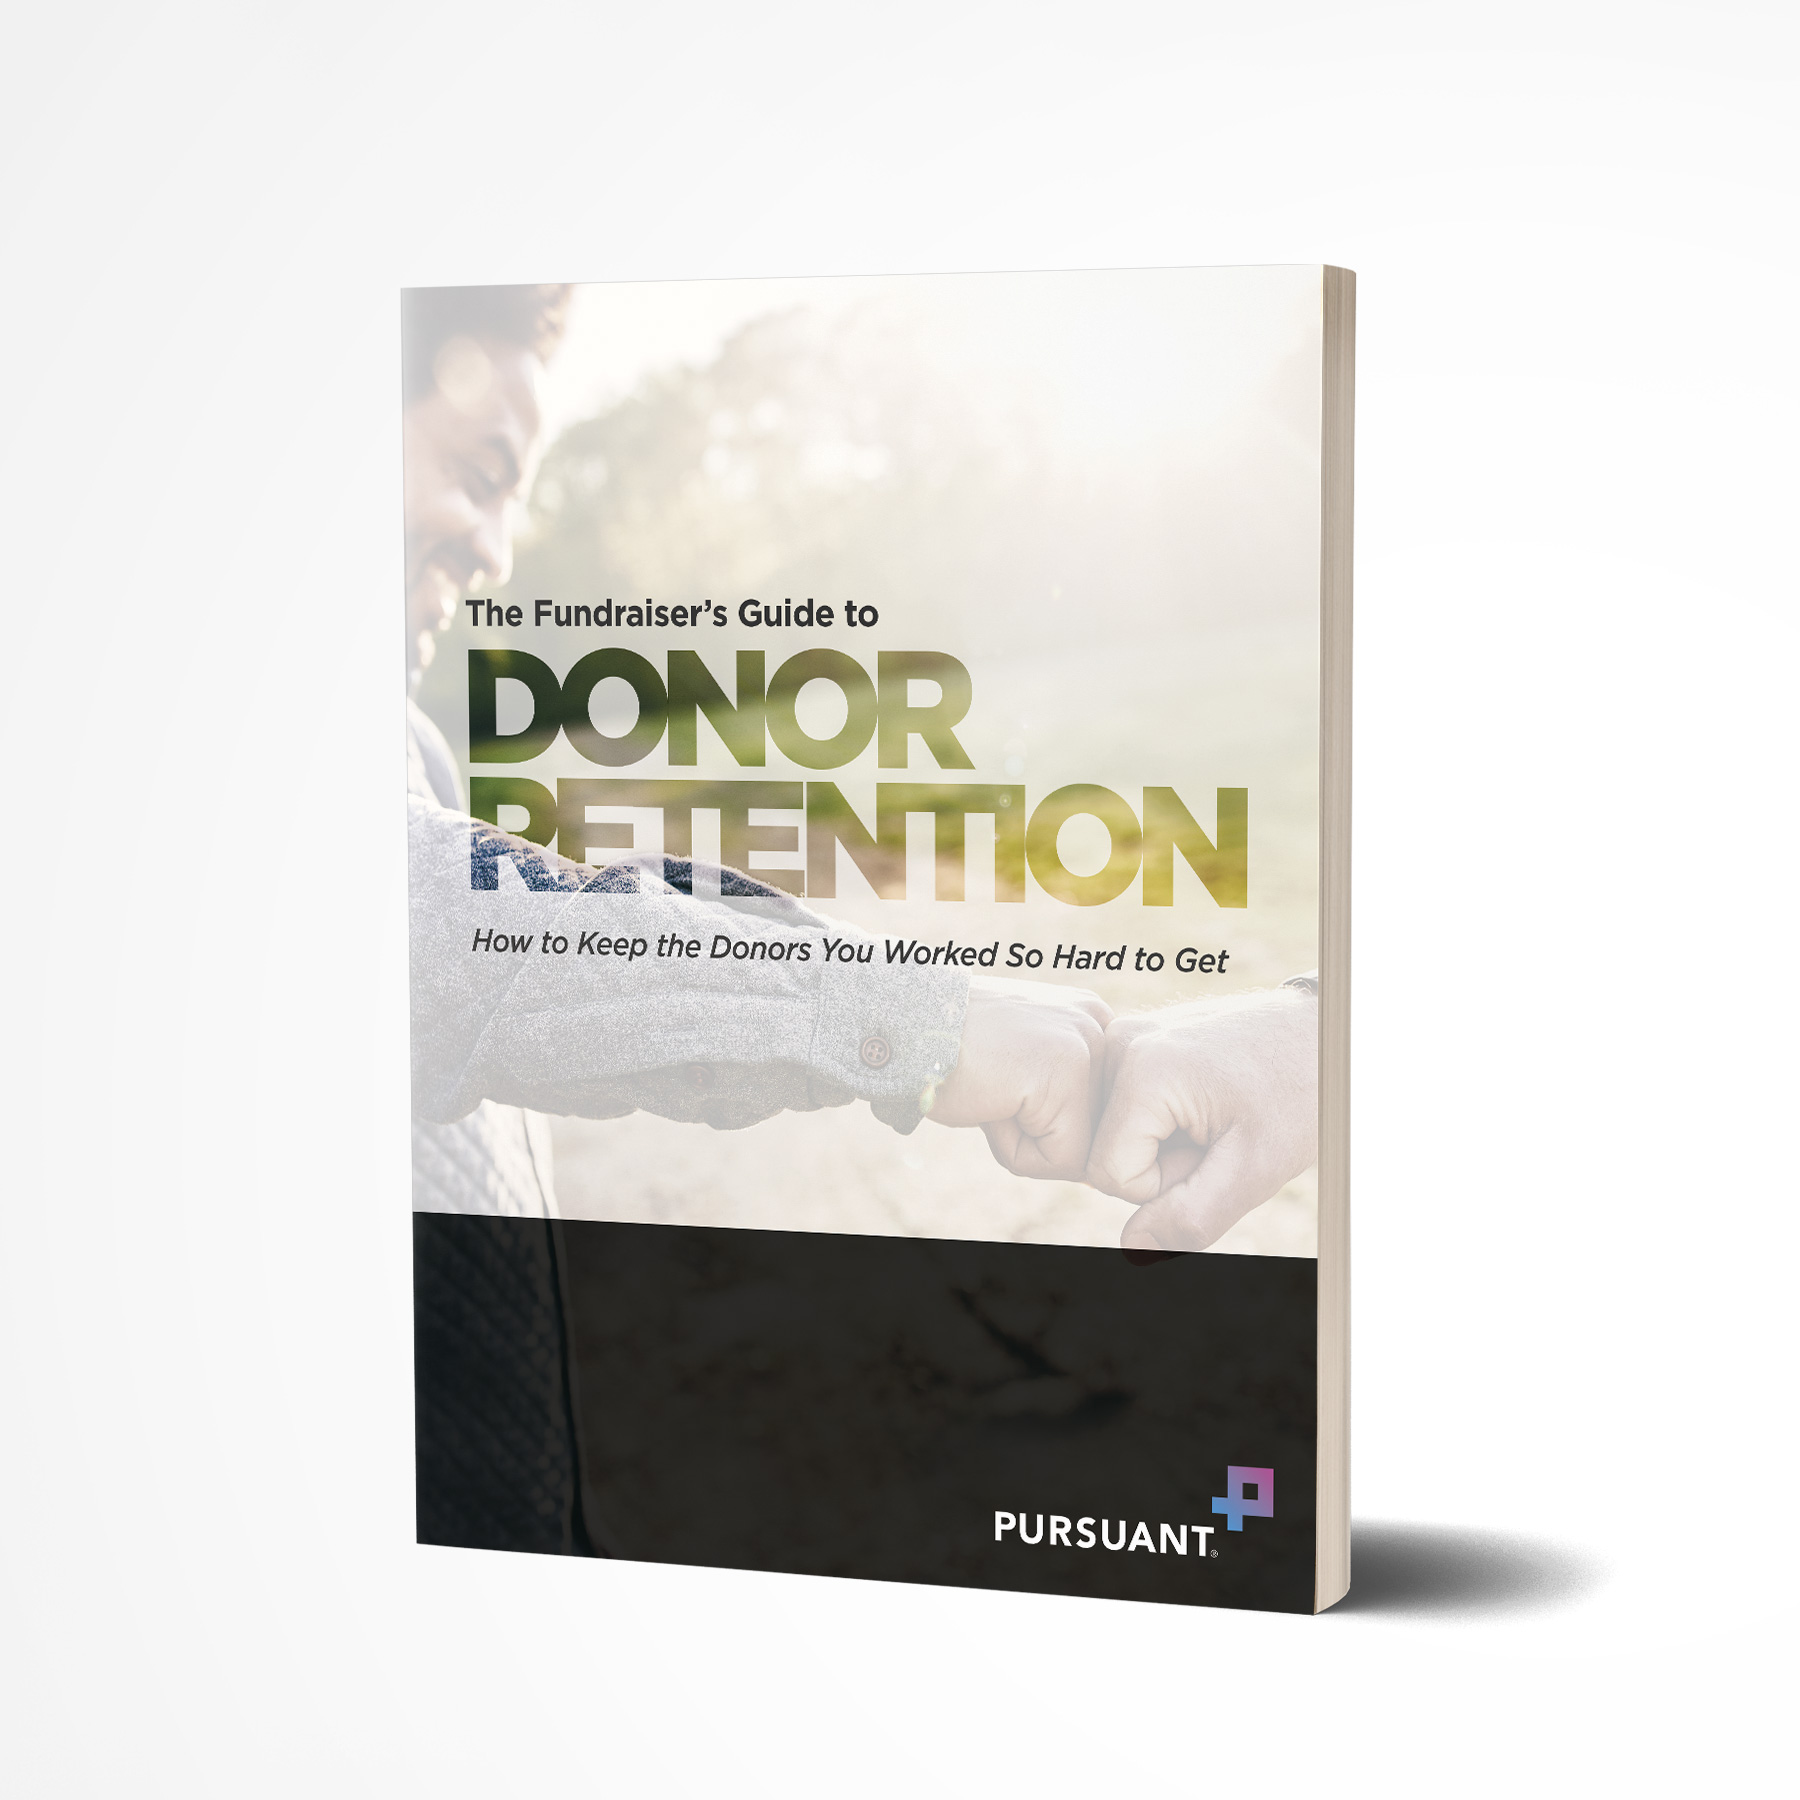 Fundraiser's Guide to Donor Retention